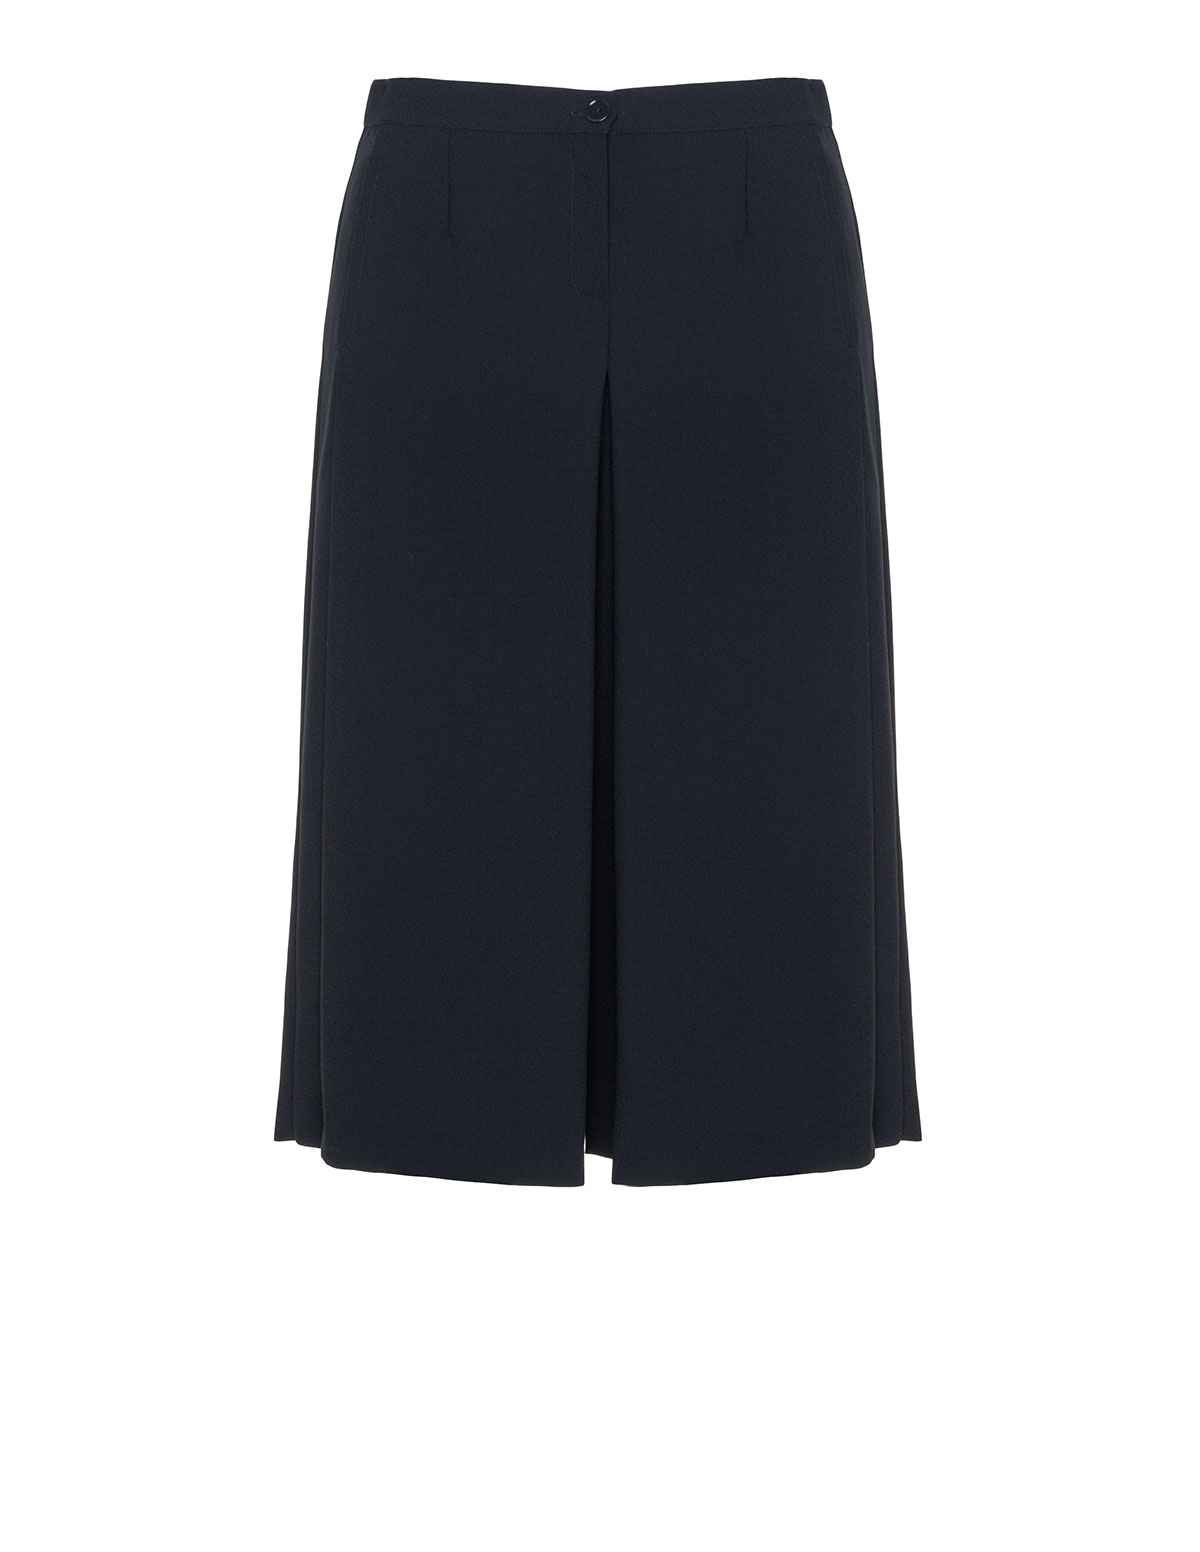 Georgette culottes by
Persona